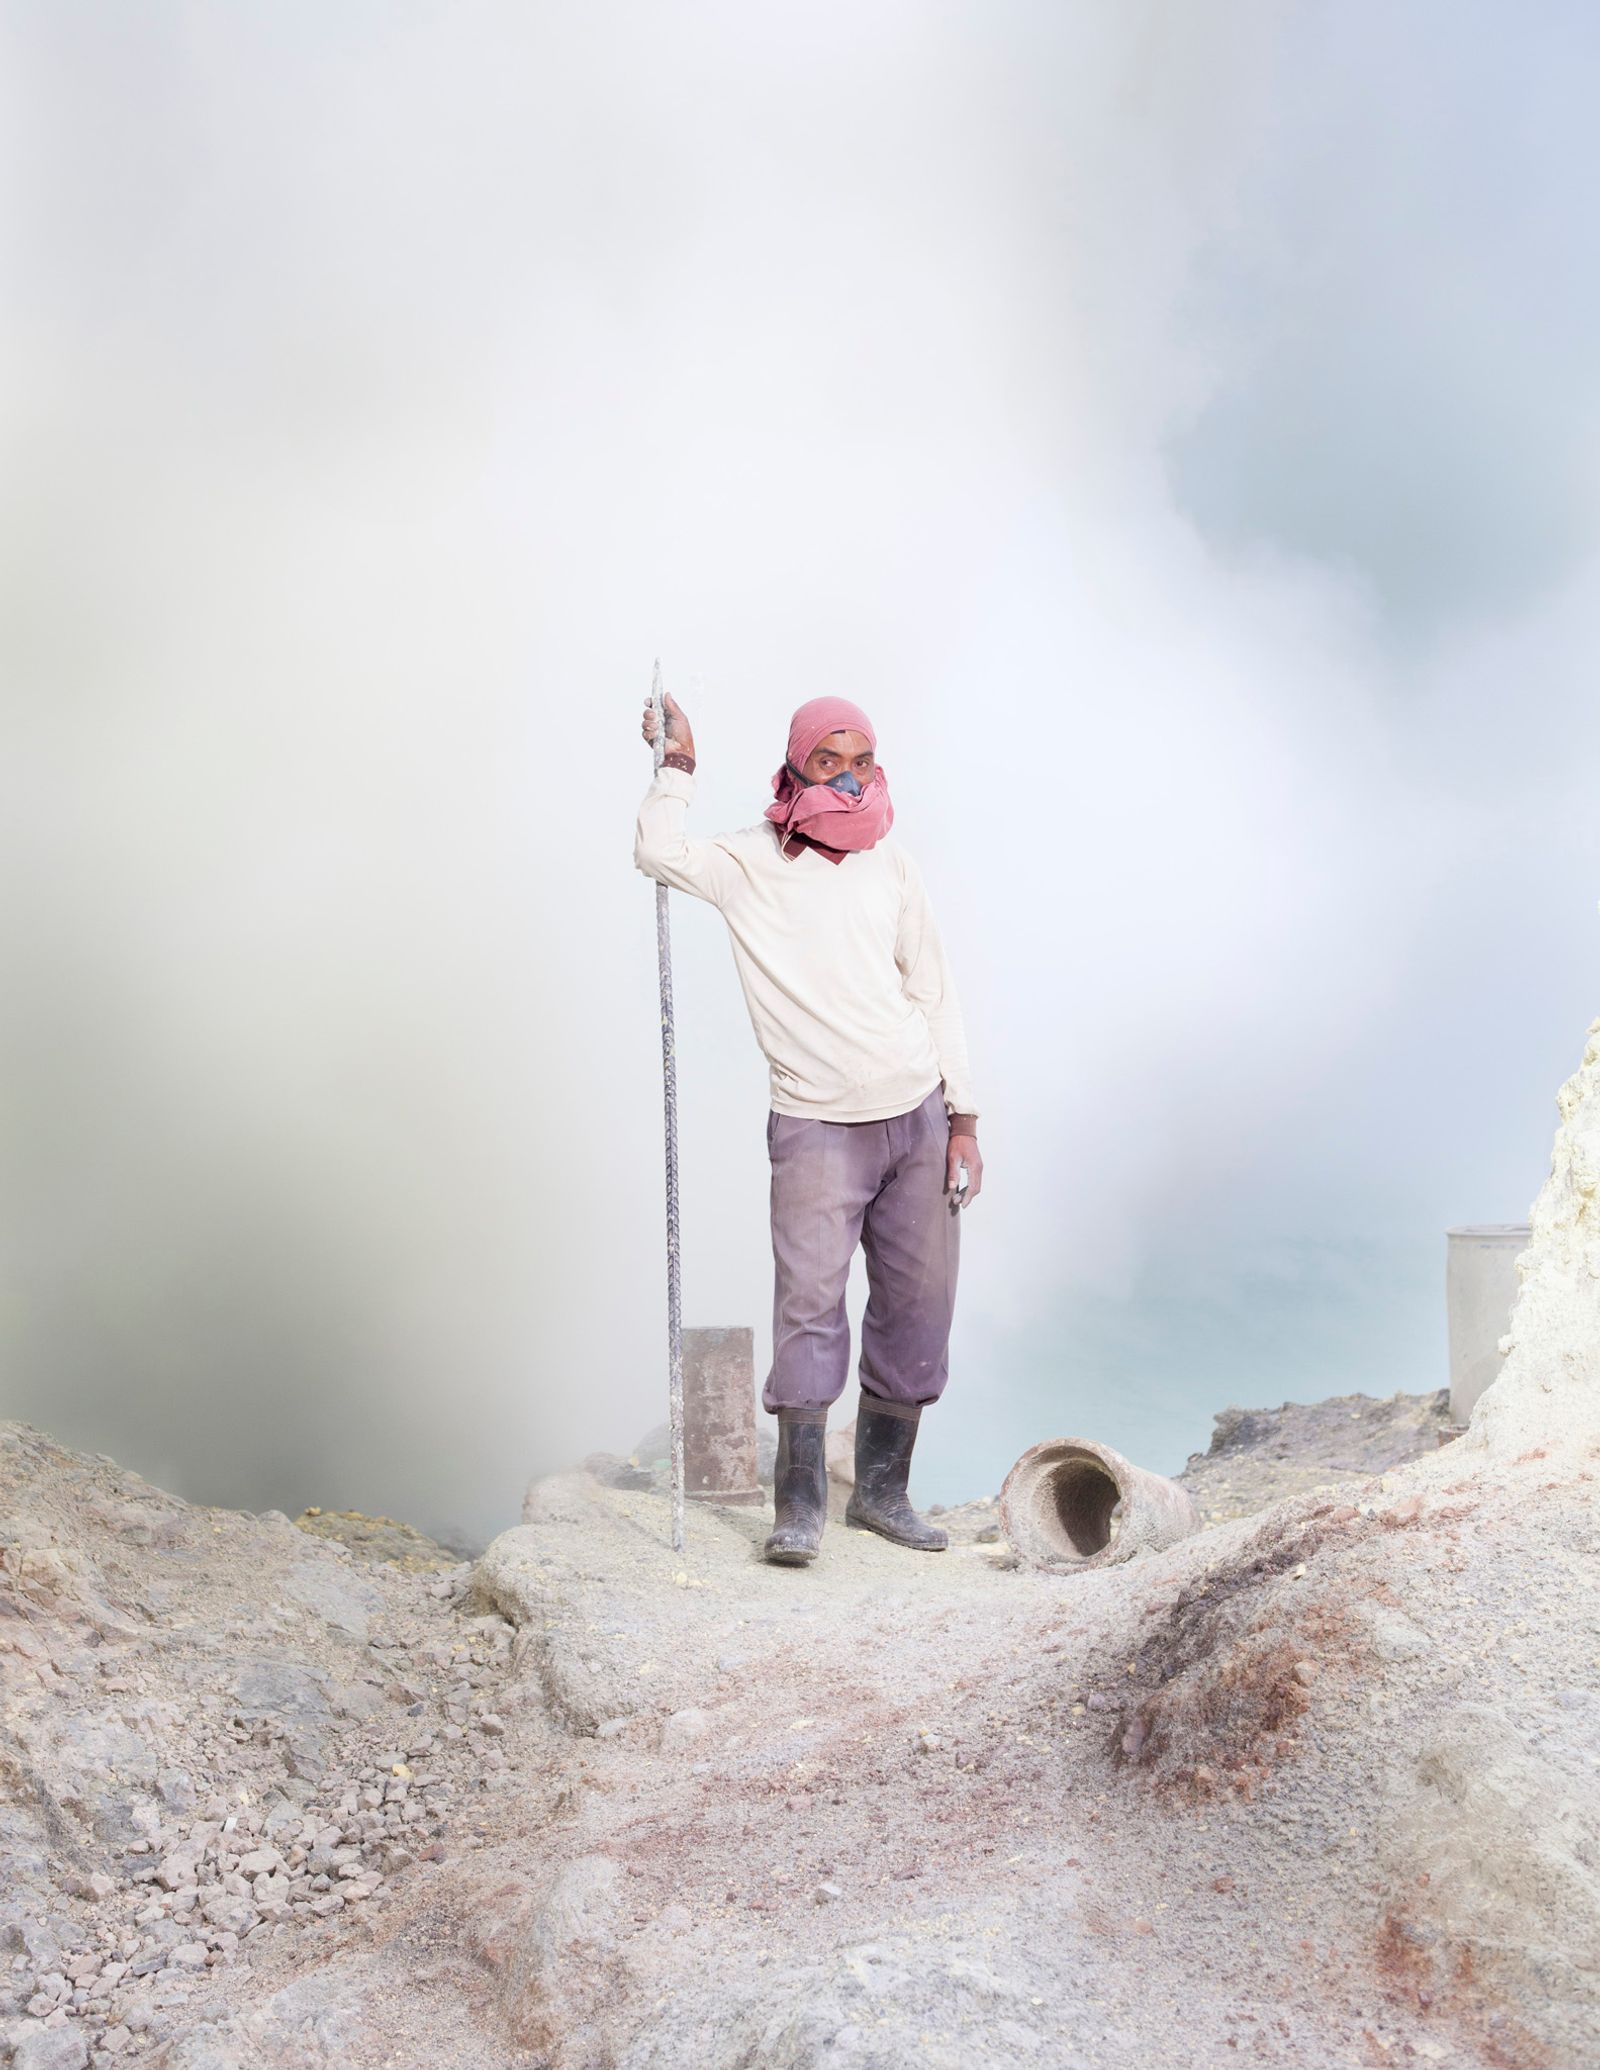 © Hahn Hartung - A sulfur miner in the crater of the Ijen volcano.